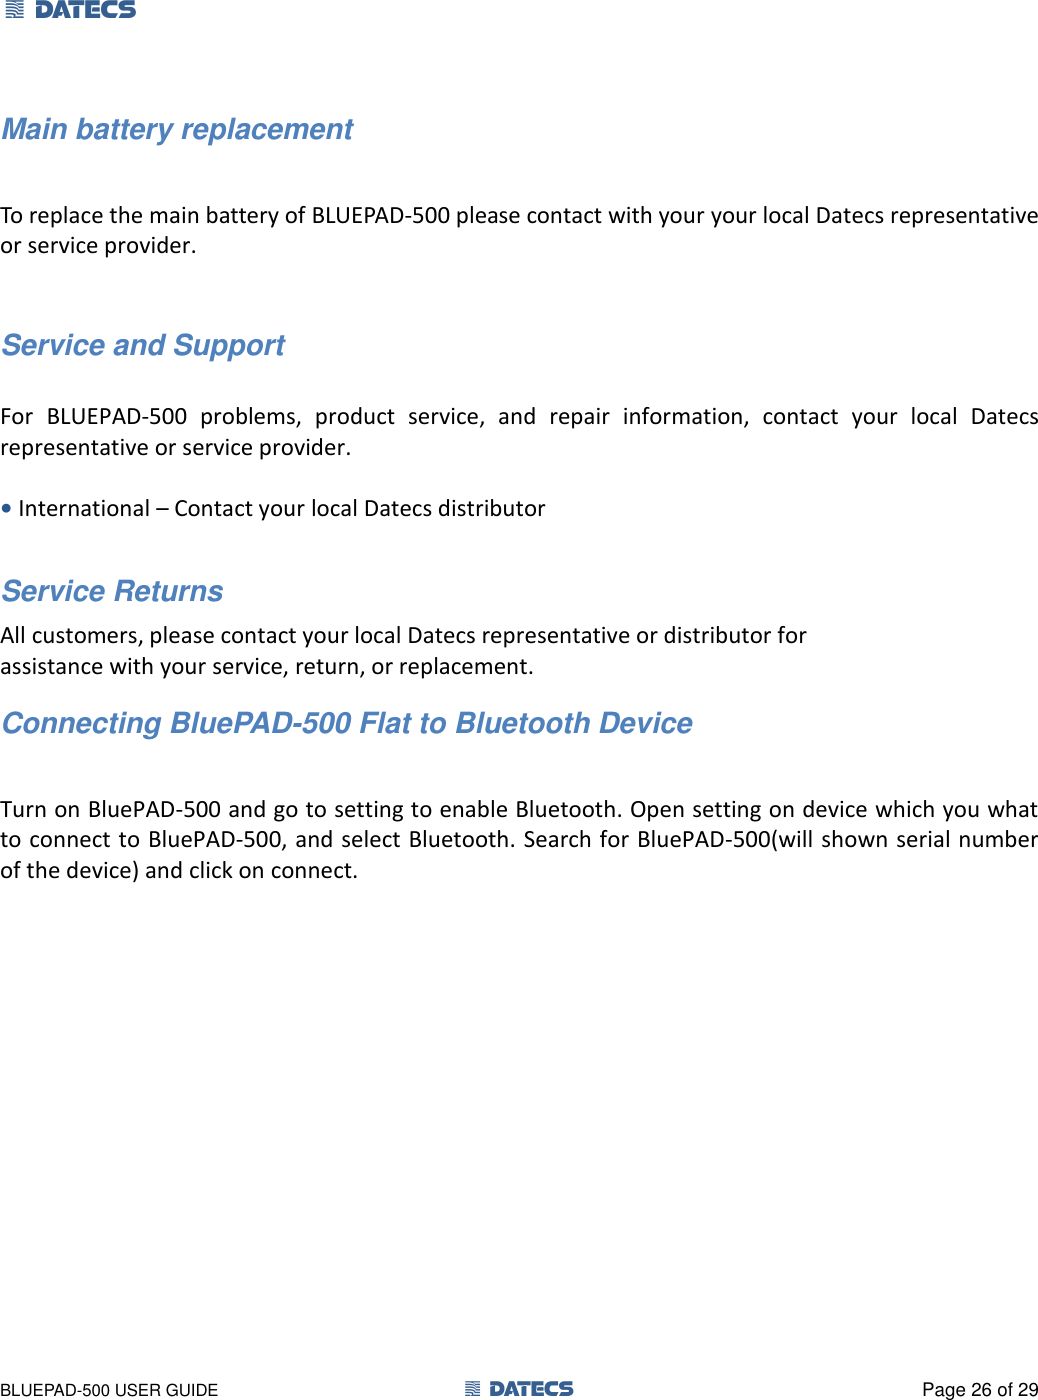 1 DATECS       BLUEPAD-500 USER GUIDE  1 DATECS  Page 26 of 29 Main battery replacement  To replace the main battery of BLUEPAD-500 please contact with your your local Datecs representative or service provider.   Service and Support  For  BLUEPAD-500  problems,  product  service,  and  repair  information,  contact  your  local  Datecs representative or service provider.  • International – Contact your local Datecs distributor  Service Returns All customers, please contact your local Datecs representative or distributor for assistance with your service, return, or replacement. Connecting BluePAD-500 Flat to Bluetooth Device  Turn on BluePAD-500 and go to setting to enable Bluetooth. Open setting on device which you what to connect to BluePAD-500, and select Bluetooth. Search for BluePAD-500(will shown serial number of the device) and click on connect. 